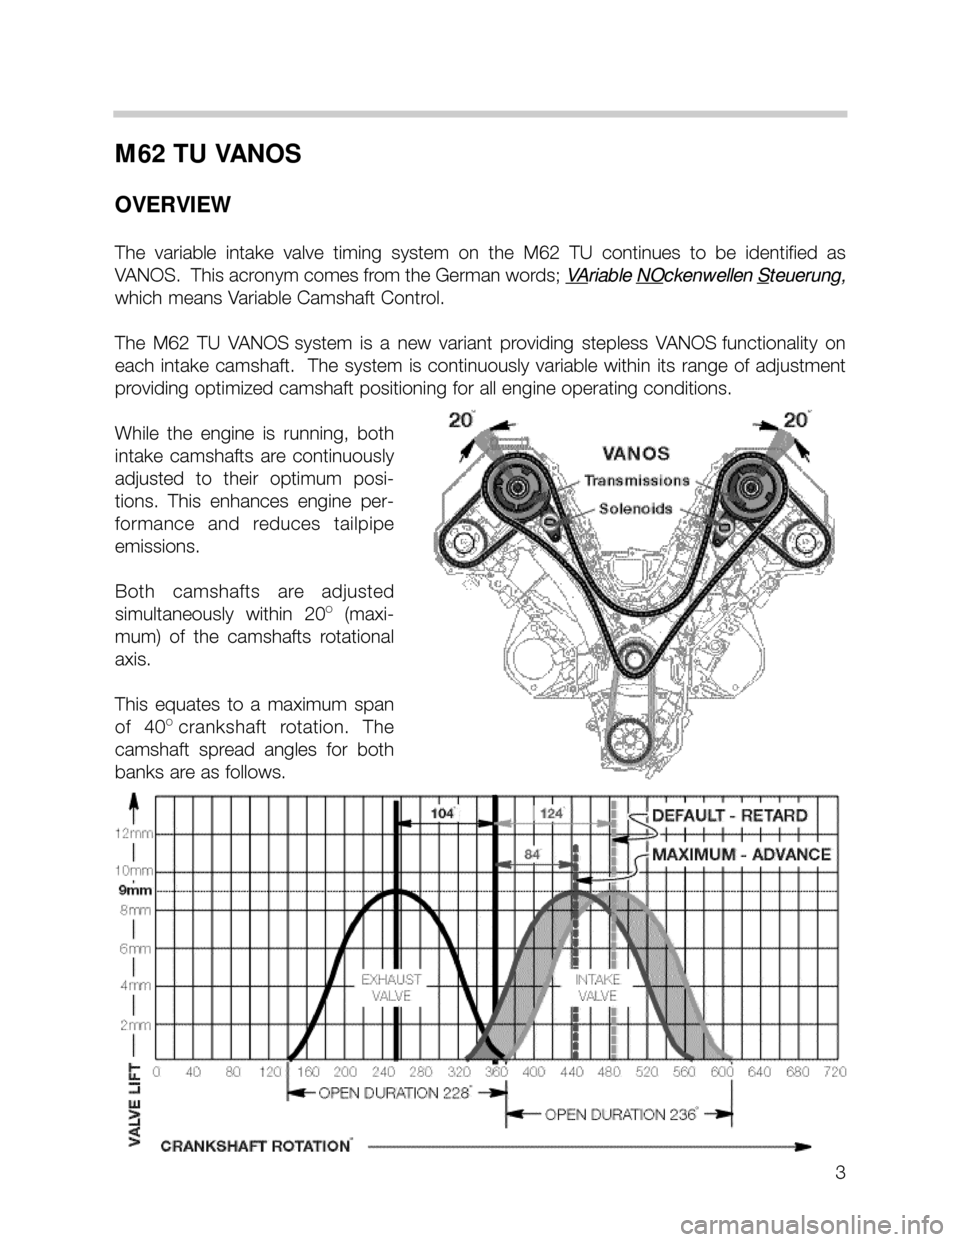 BMW X5 2004 E53 M62TU Engine Workshop Manual 3
M62 TU VANOS
OVERVIEW
The  variable  intake  valve  timing  system  on  the  M62  TU  continues  to  be  identified  as
VANOS.  This acronym comes from the German words; V
Ariable NOckenwellen Steue